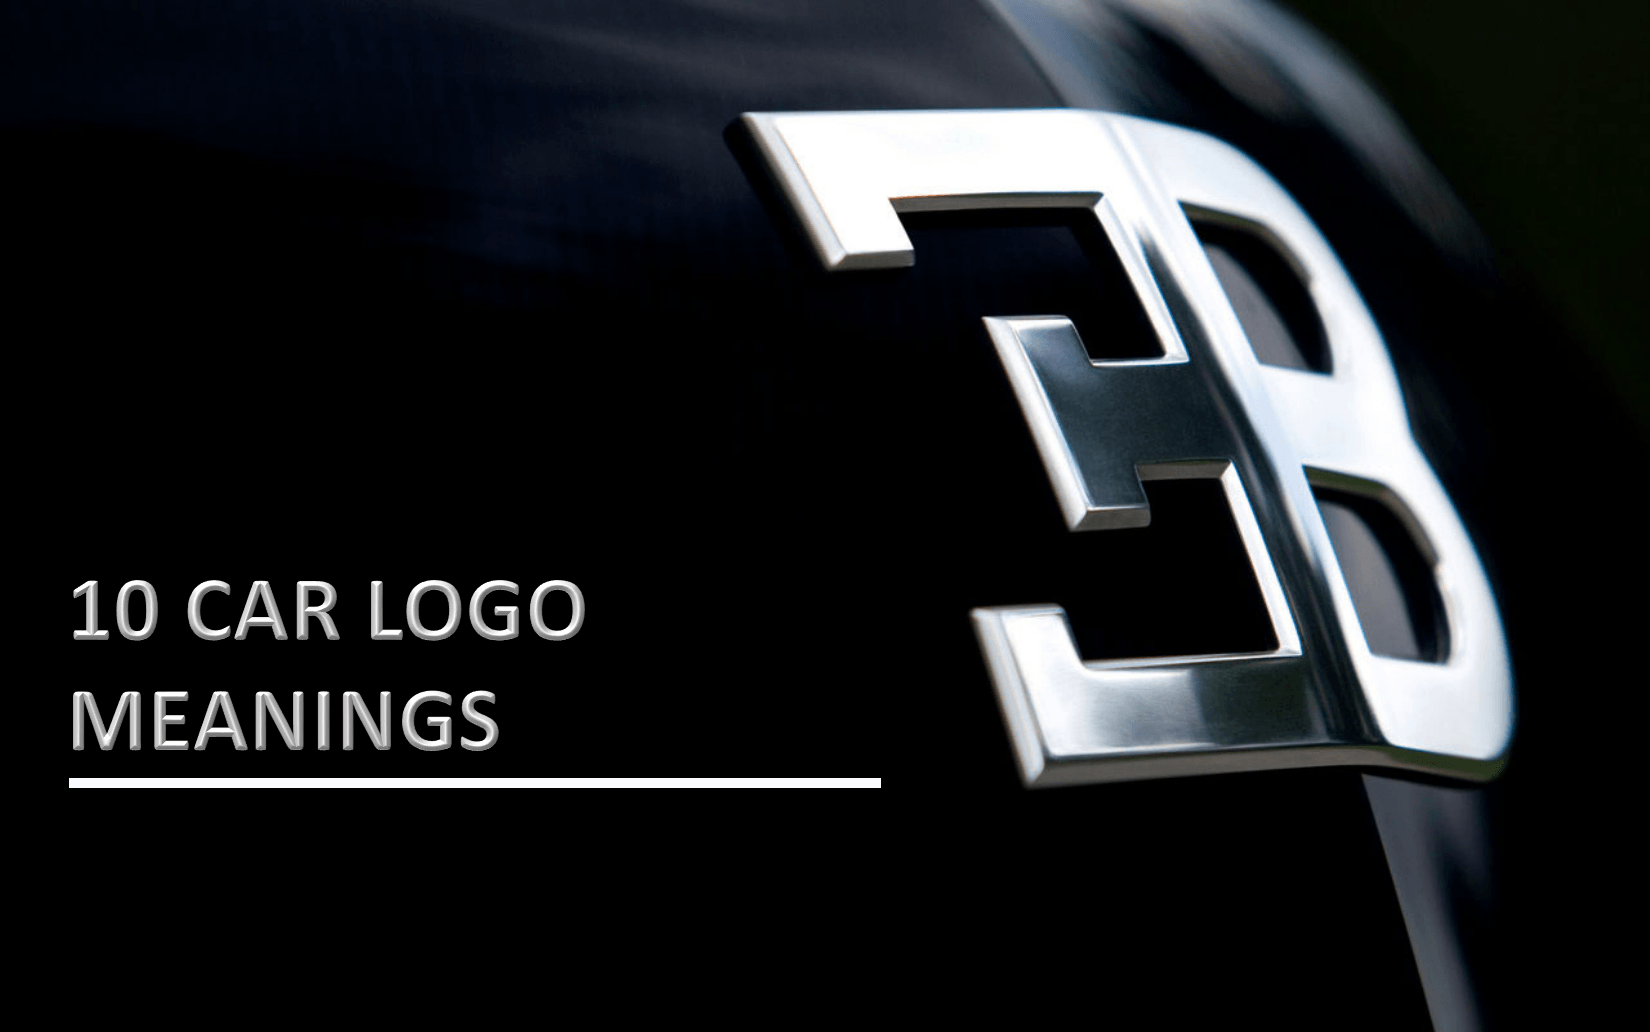 All the Luxury Car Logo - 10 Car Logo Meanings You May Not Expect - CAR FROM JAPAN